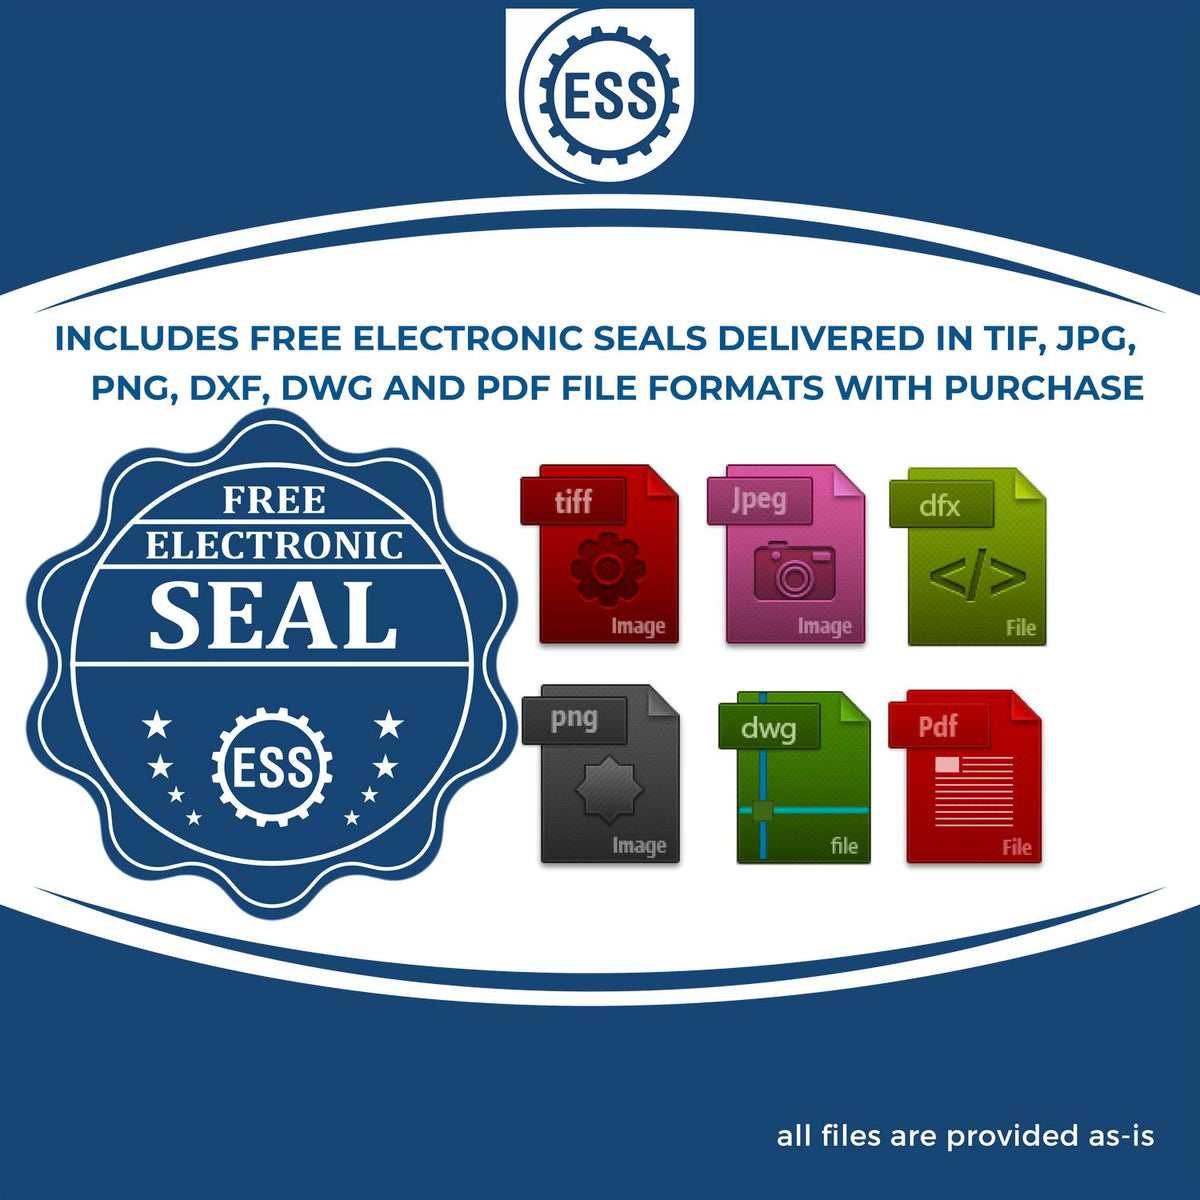 An infographic for the free electronic seal for the Maine Professional Engineer Seal Stamp illustrating the different file type icons such as DXF, DWG, TIF, JPG and PNG.